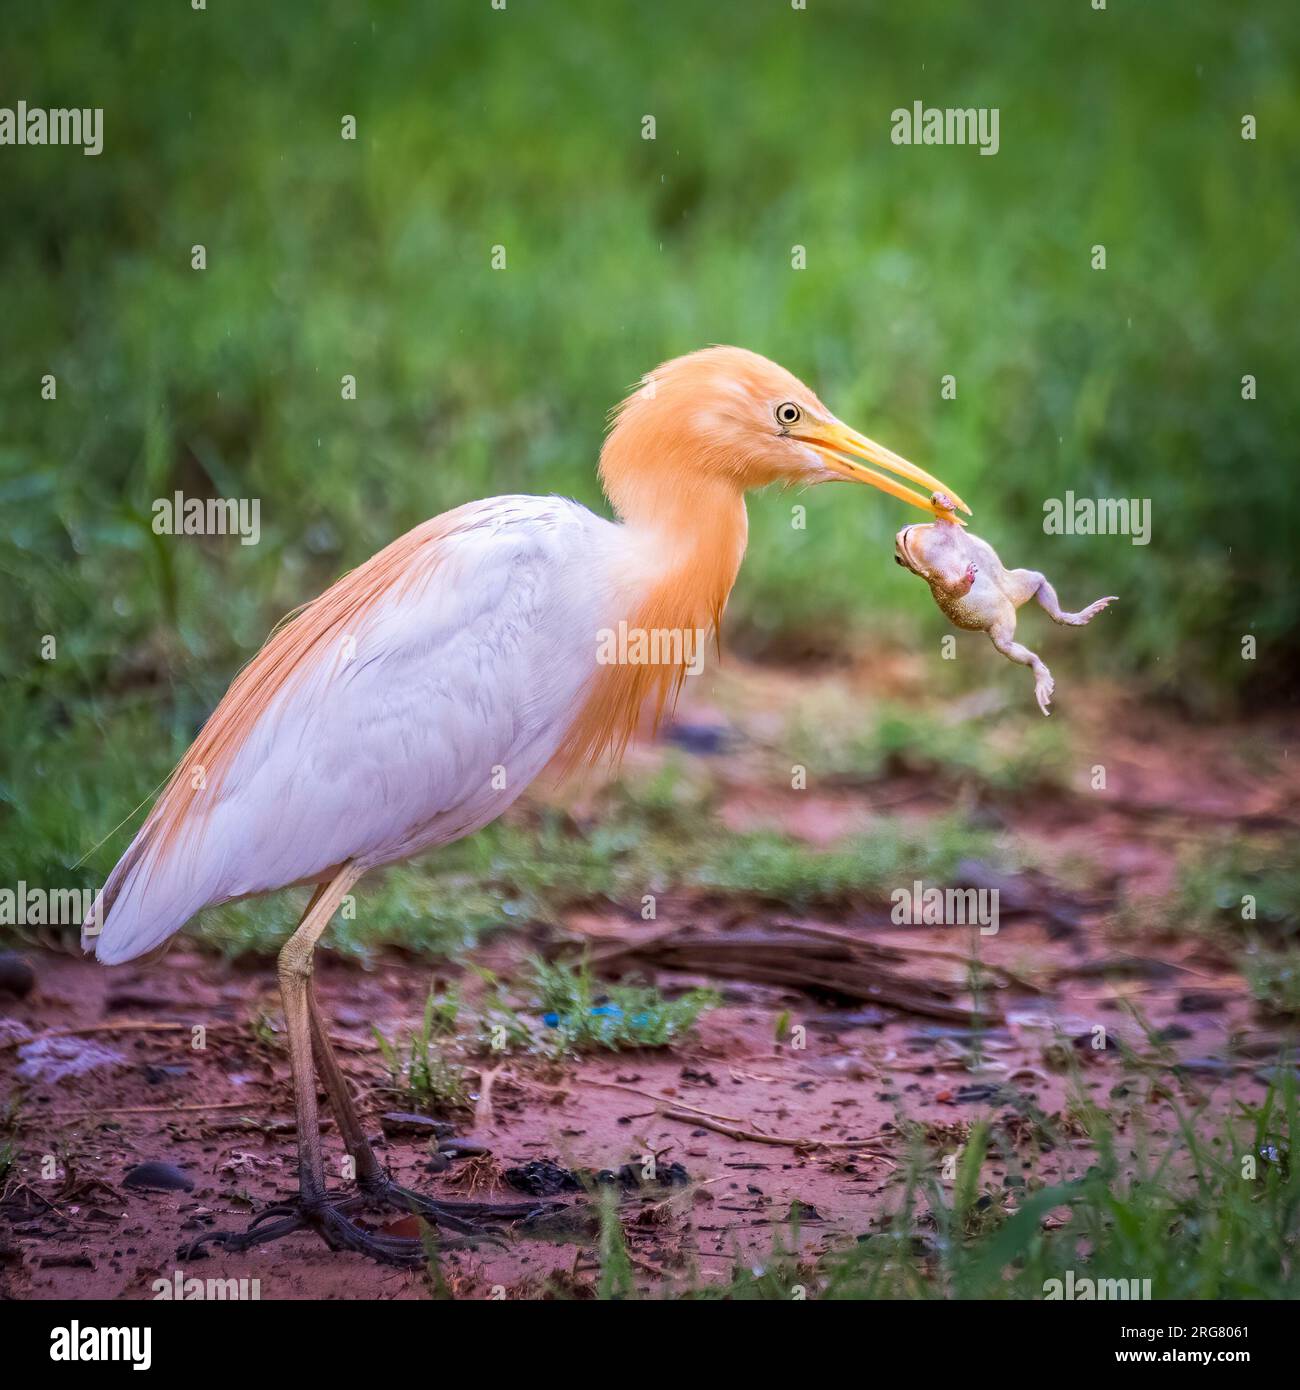 The frog tries to break free from the egret's beak. Chandigarh, India: THRILLING images show a hapless frog swinging helplessly in the beak of a cattl Stock Photo